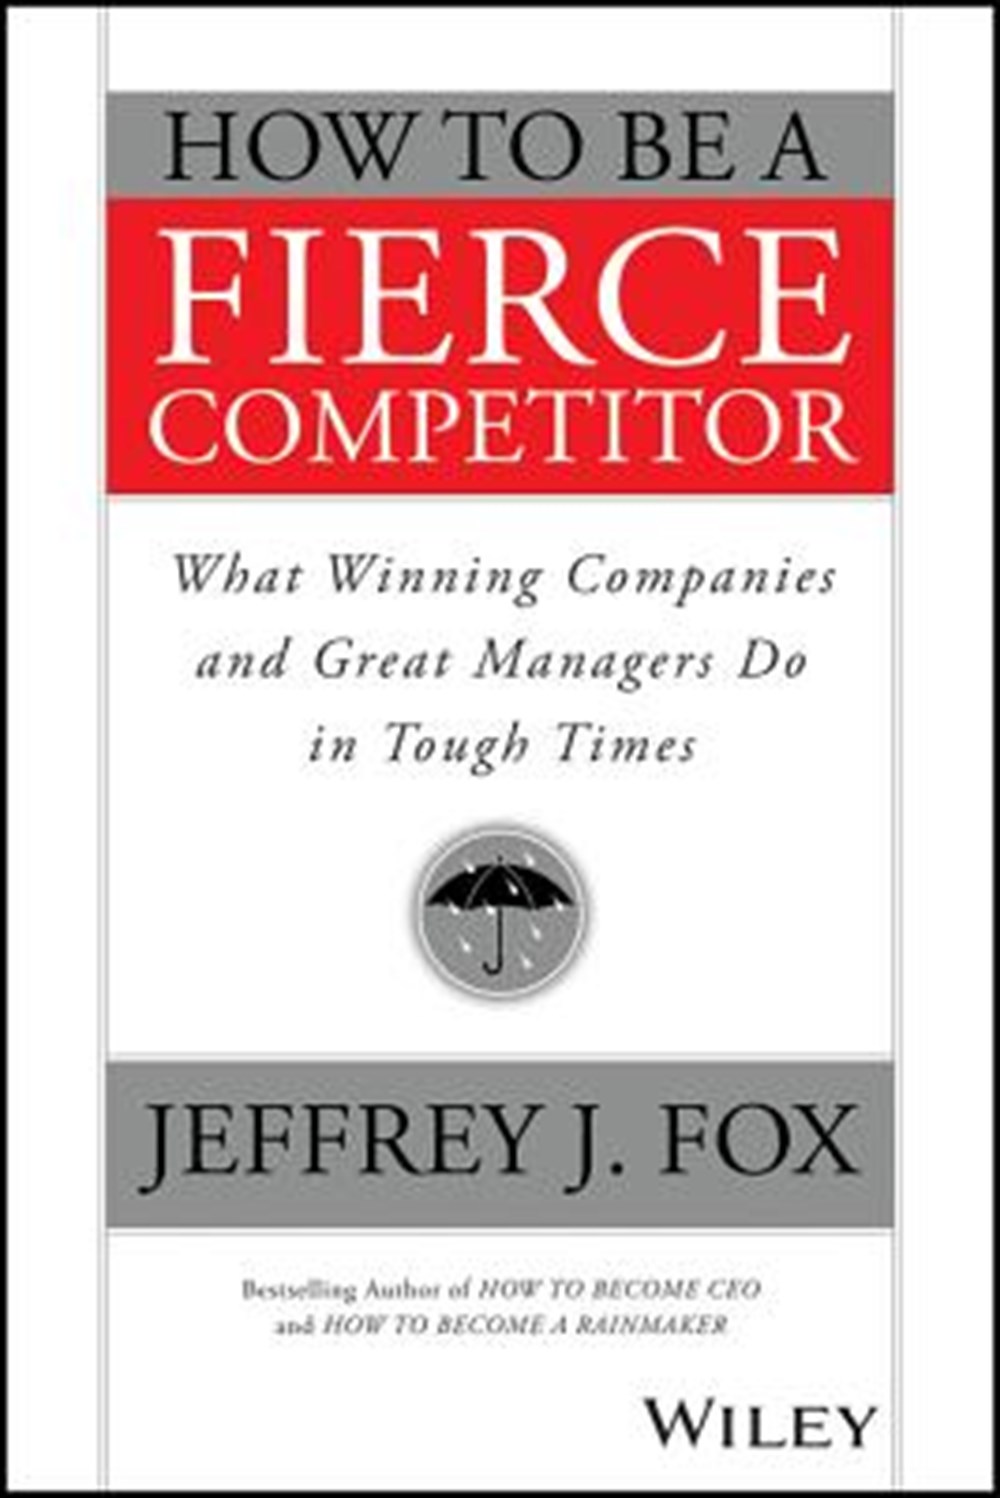 How to Be a Fierce Competitor What Winning Companies and Great Managers Do in Tough Times